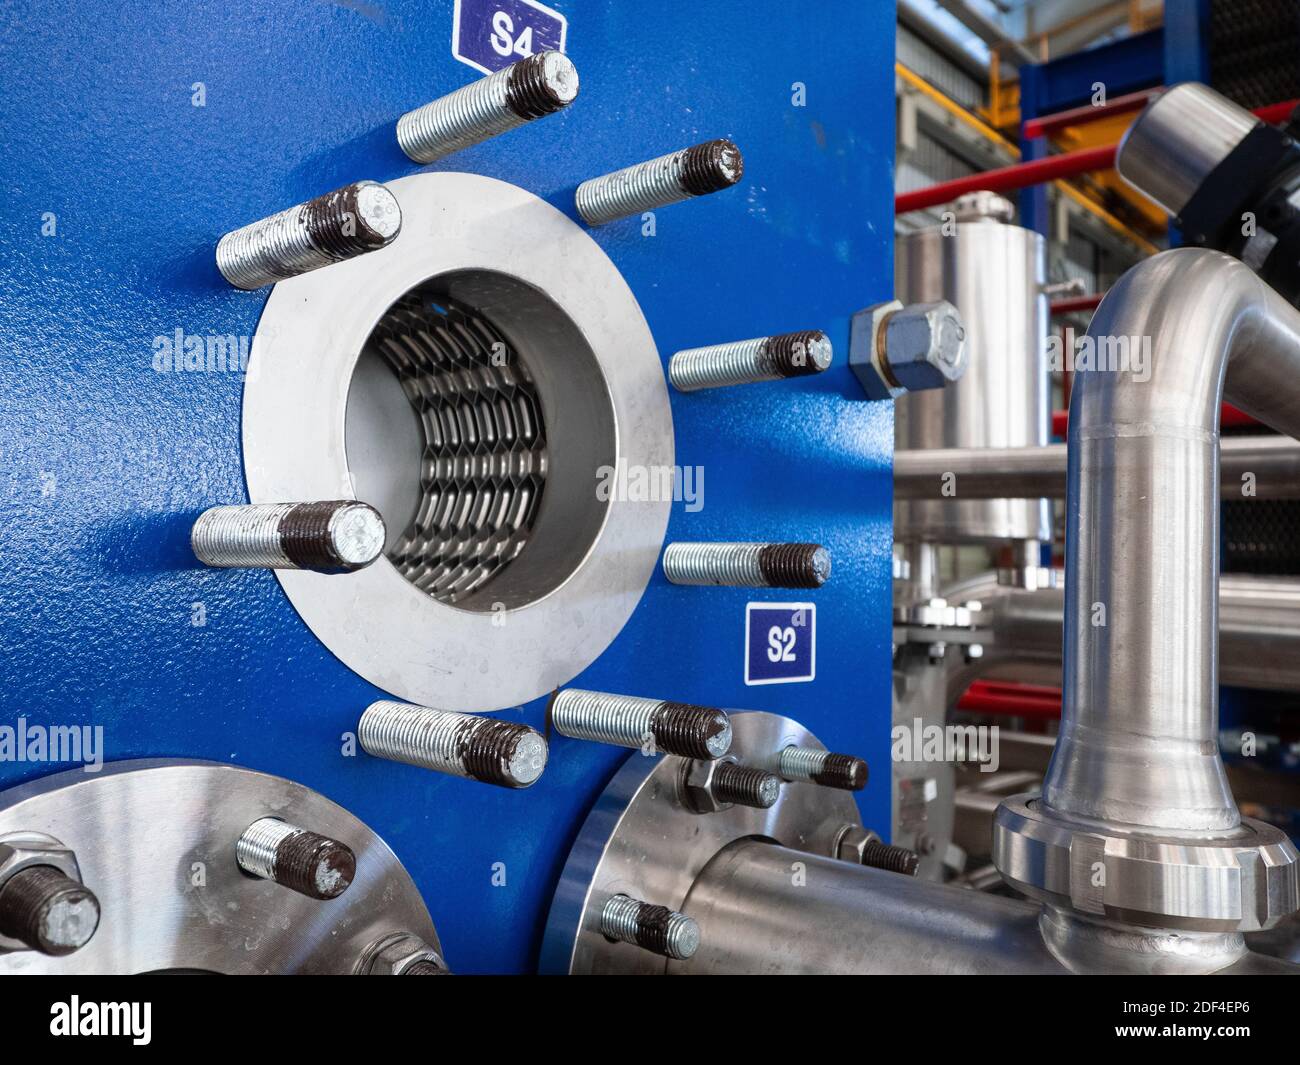 Front plate of plate heat exchanger with some piping removed. Stock Photo